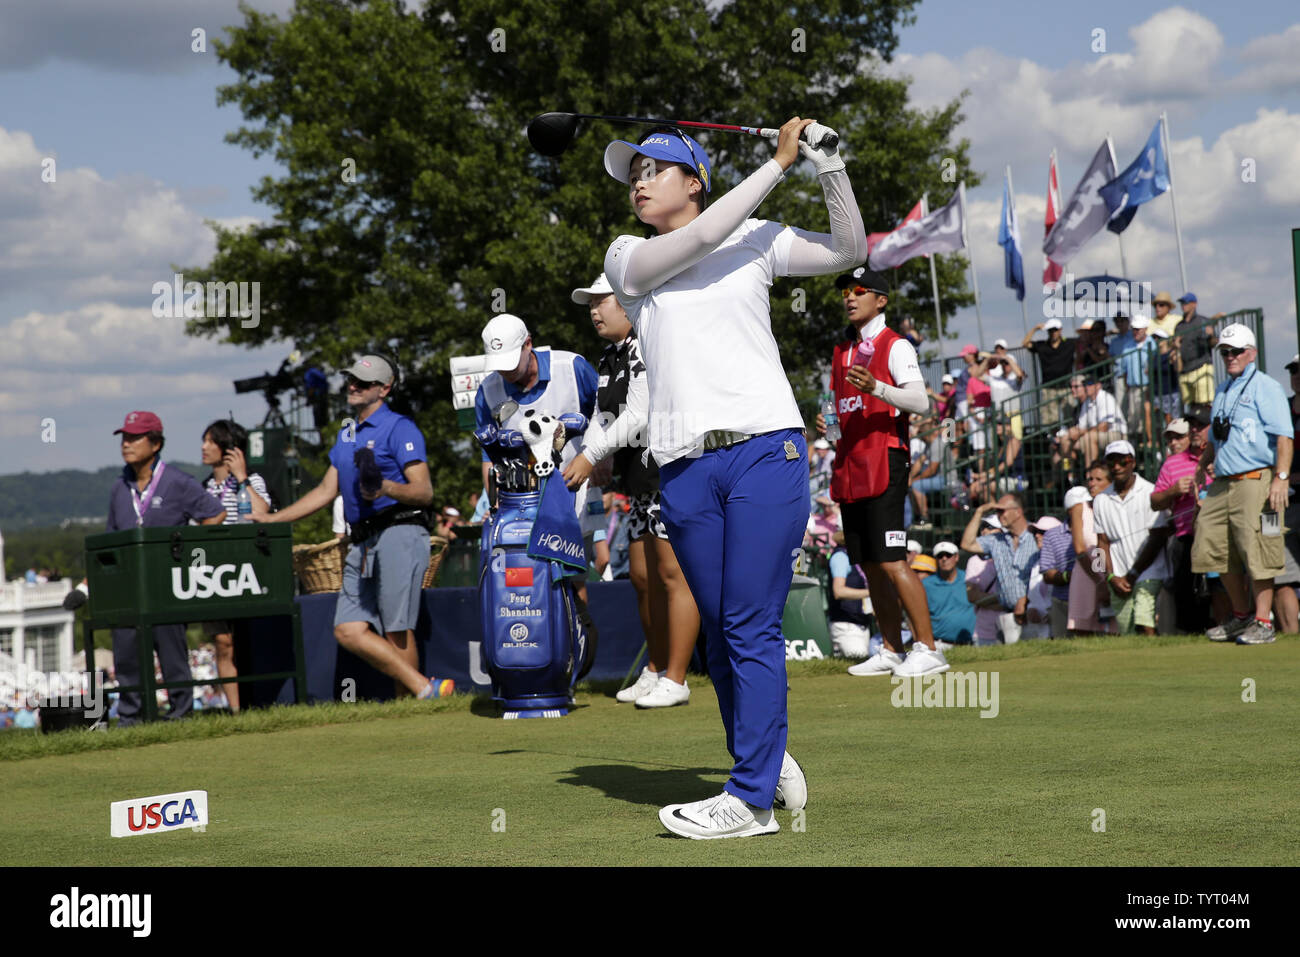 Amature Hye-Jin Choi of South Korea hits a tee shot on the 10th hole at Trump National Golf Club for the final round of the LPGA U.S. Women's Open Championship  in Bedminster, NJ on July 14, 2017.     Photo by John Angelillo/UPI Stock Photo